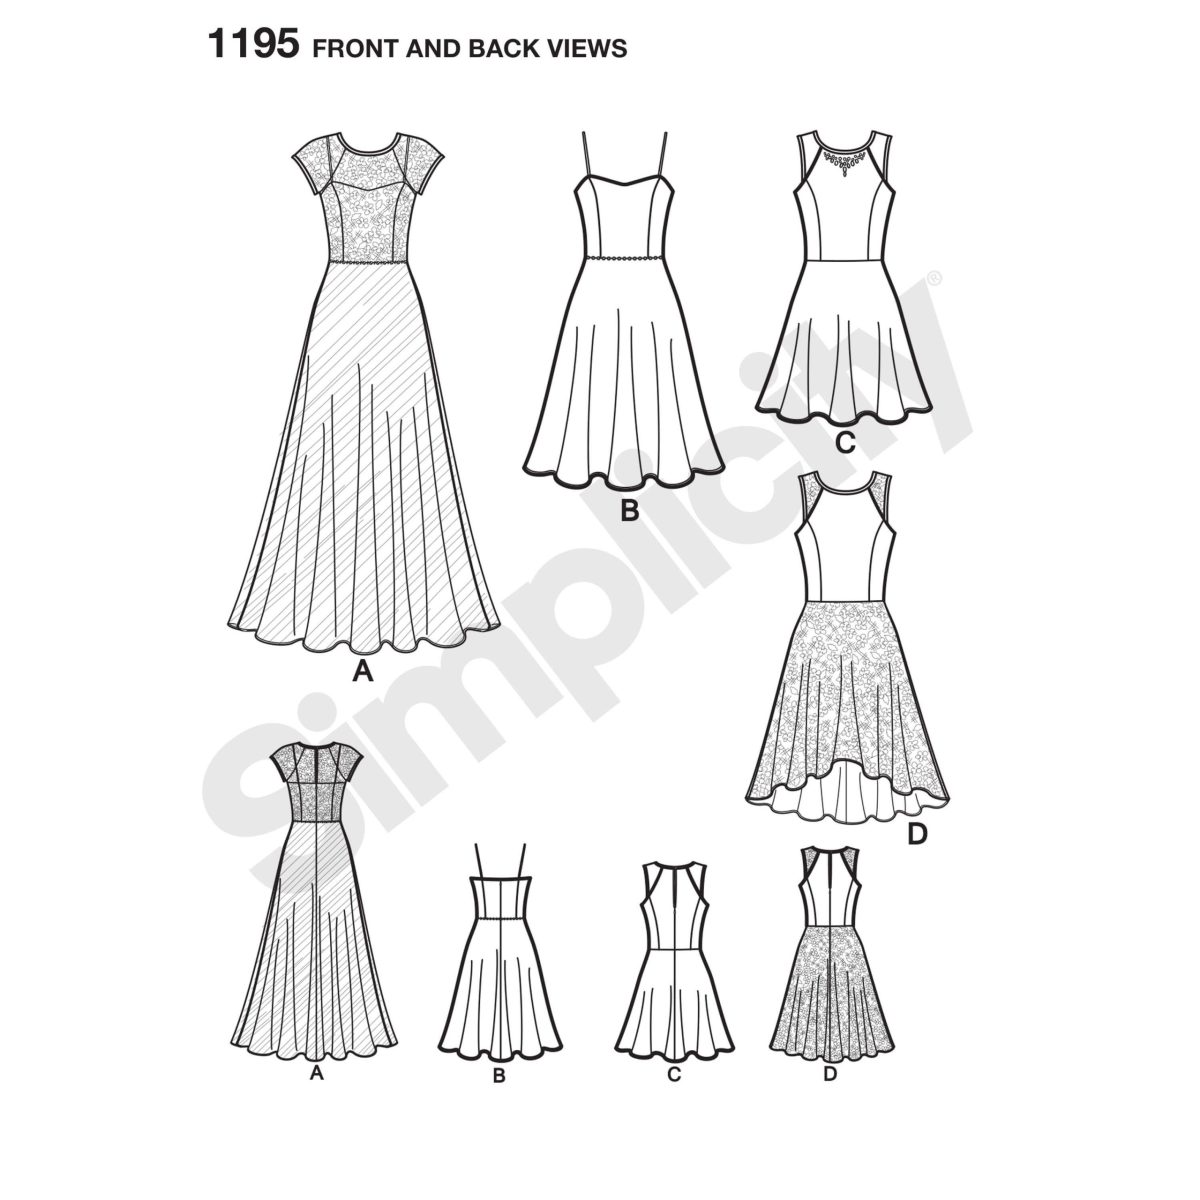 Simplicity Sewing Pattern 1195 Misses and Miss Petite Special Occasion Dress